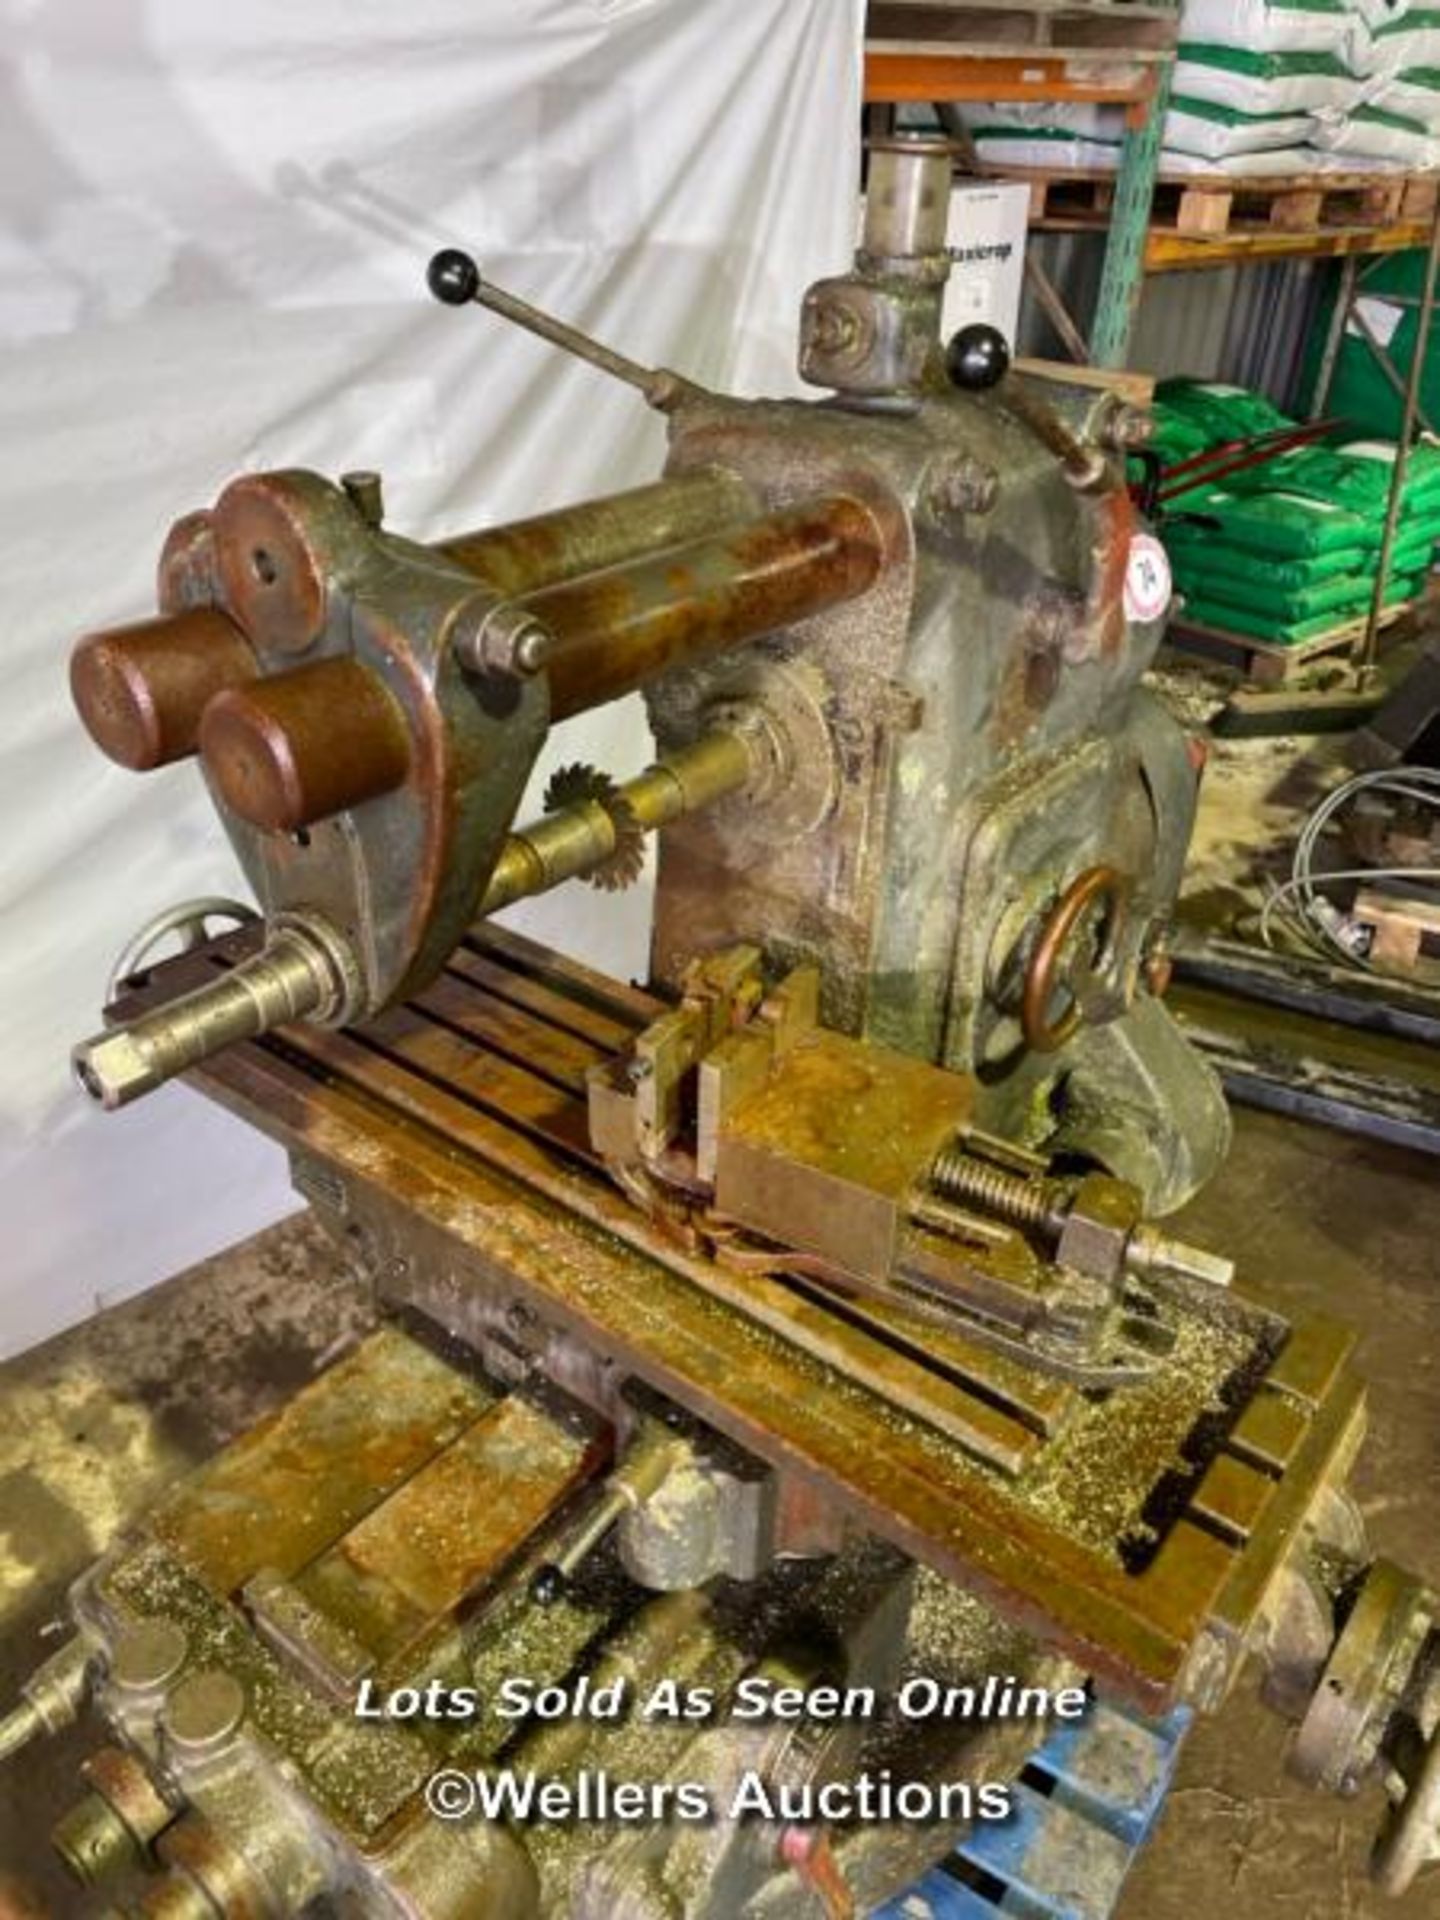 VINTAGE ALFRED HERBERT LTD. HORIZONTAL MILL, WITH VICE, IN WORKING ORDER - Image 4 of 10